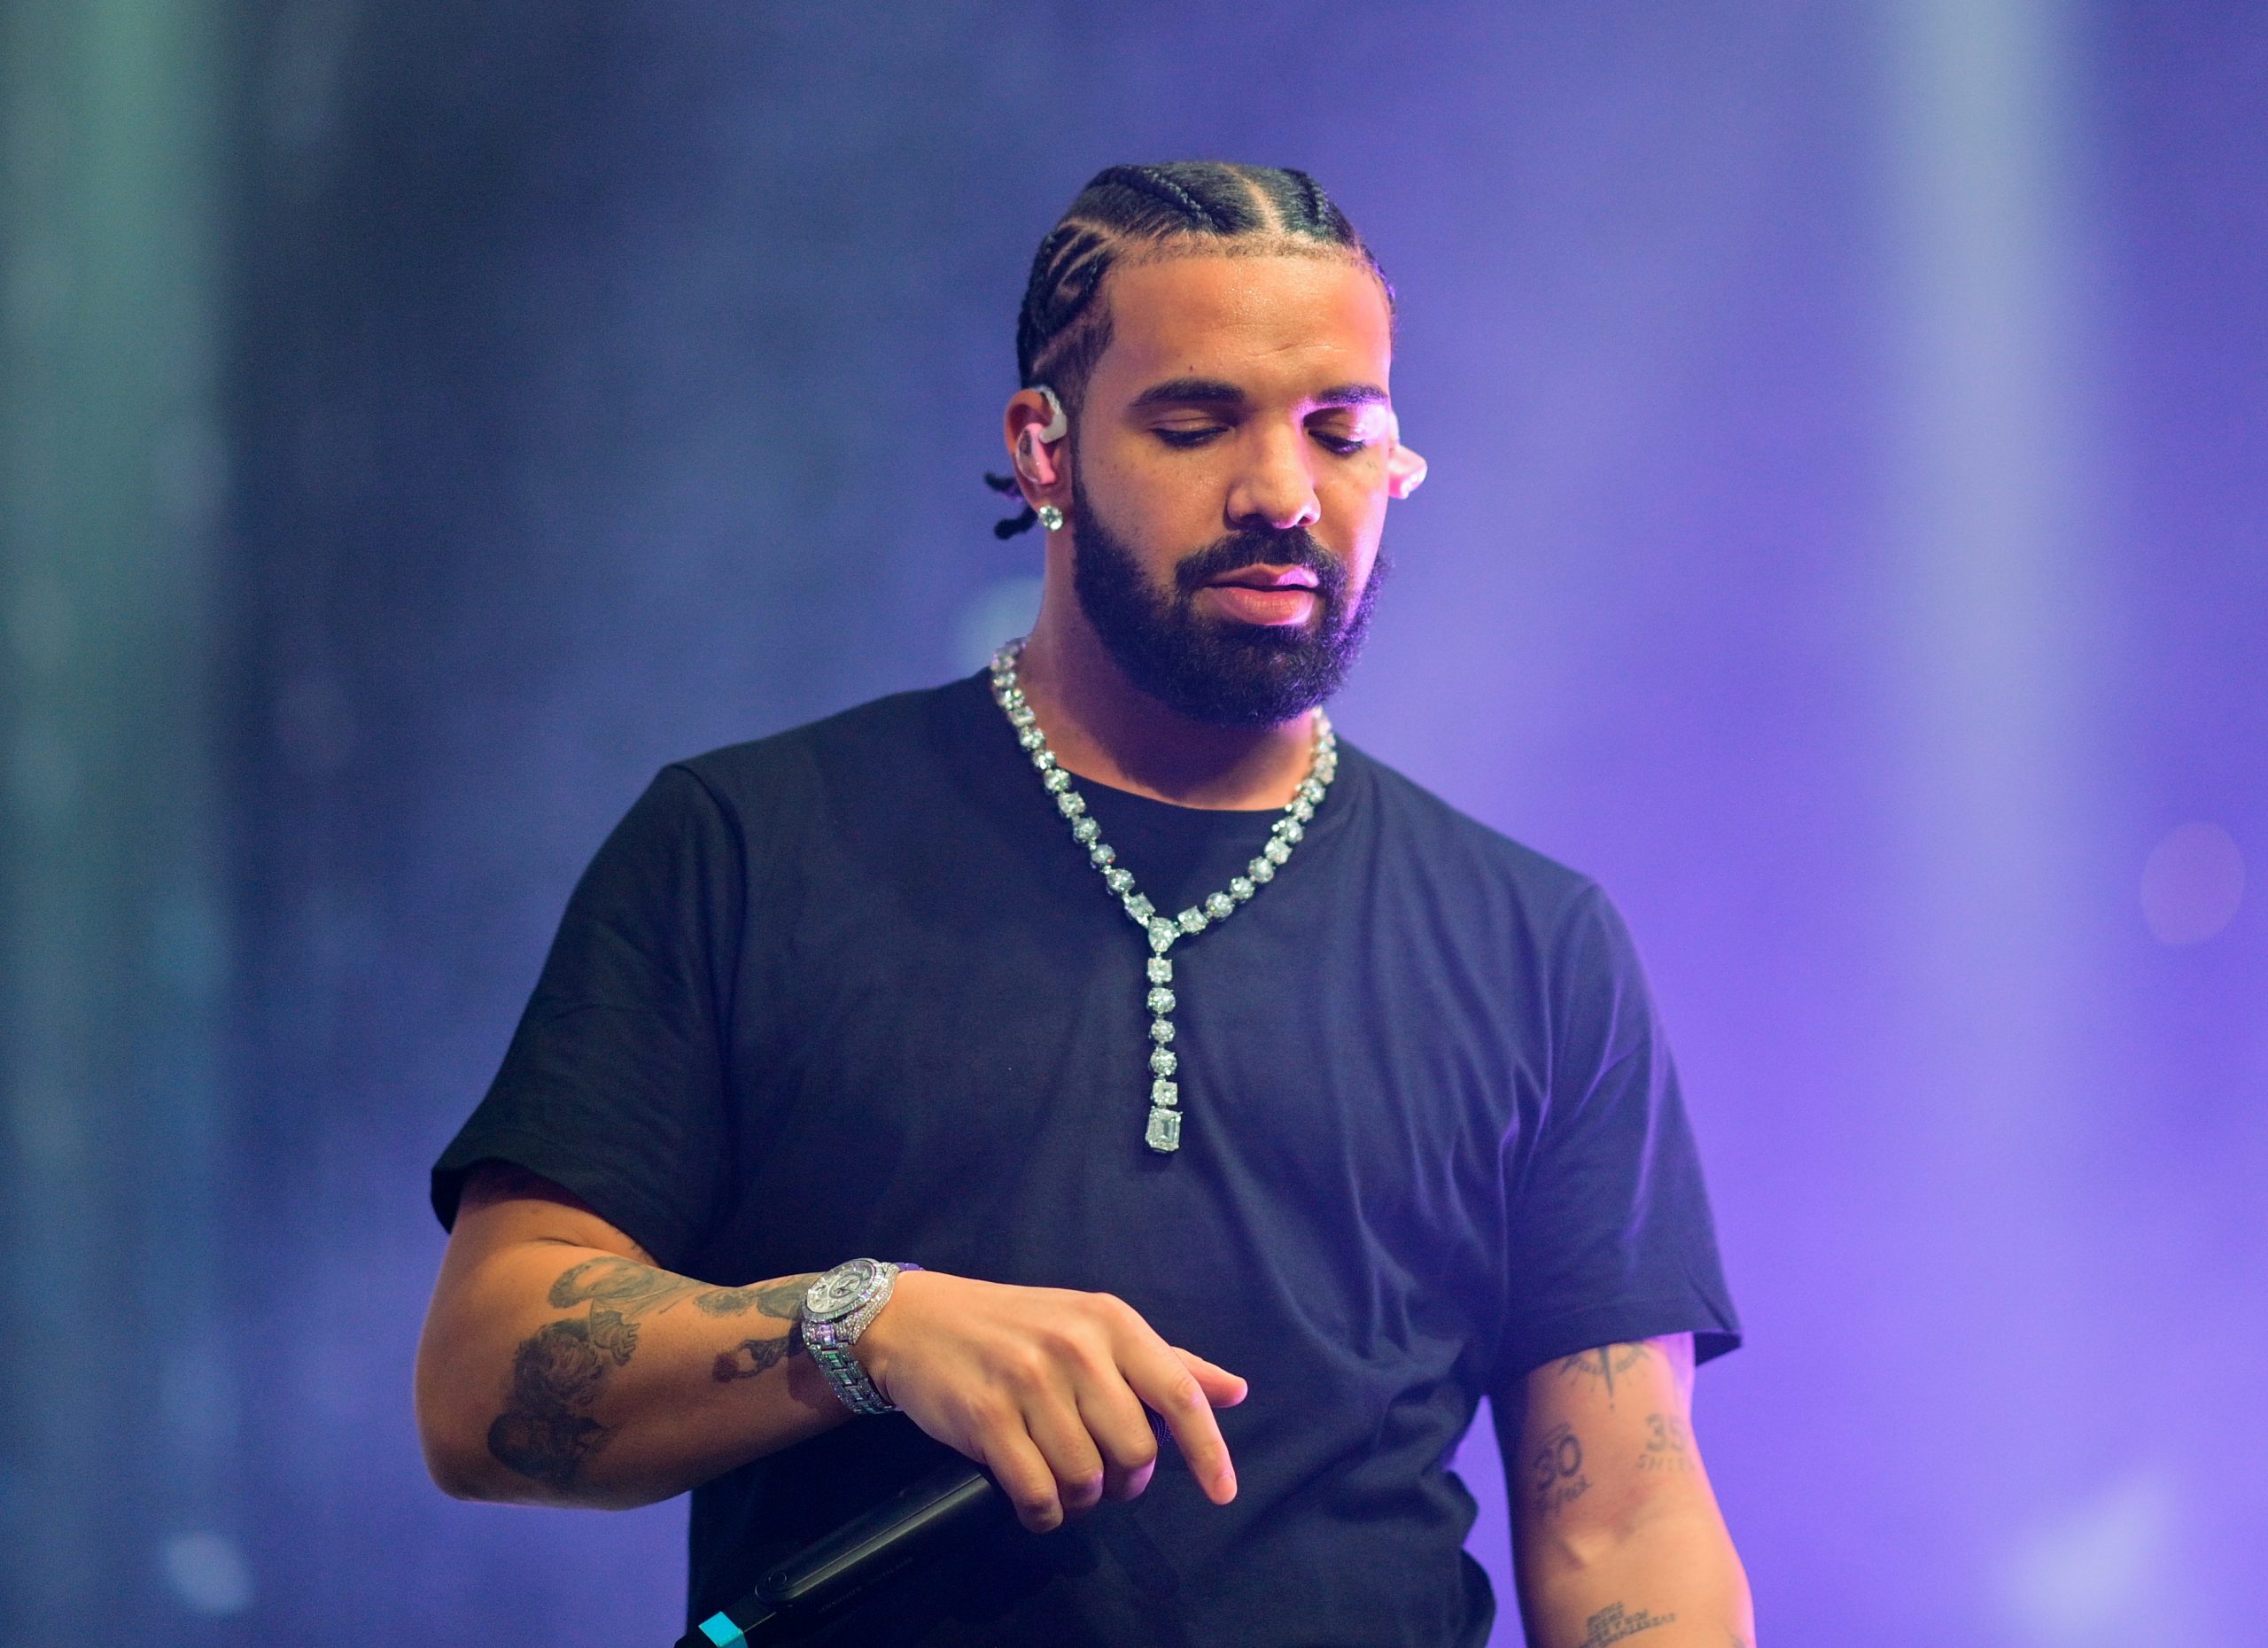 Alex Moss, Jewelry Designer to Drake, Releases New Collection